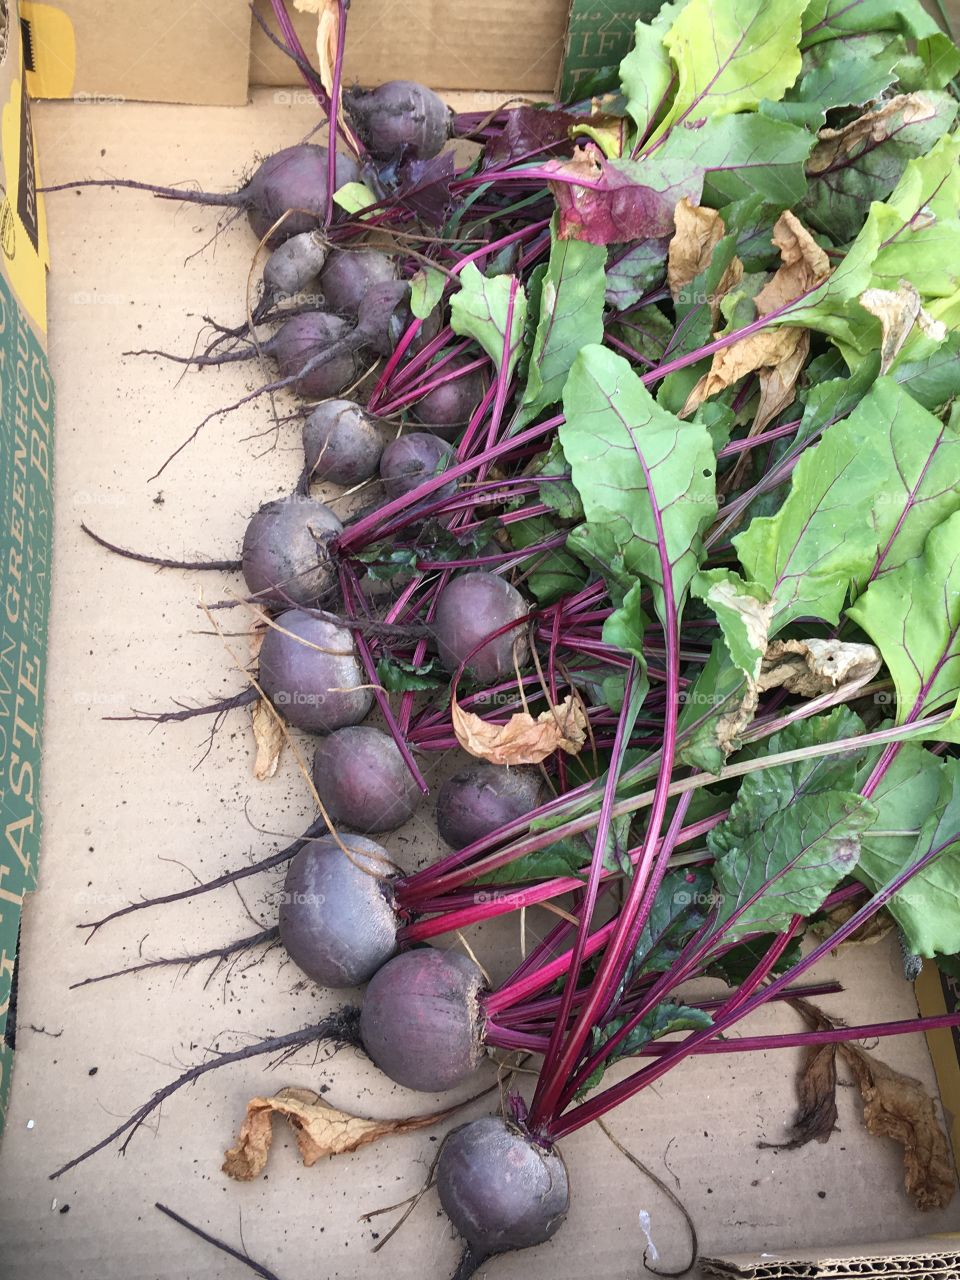 Fresh beets from my garden